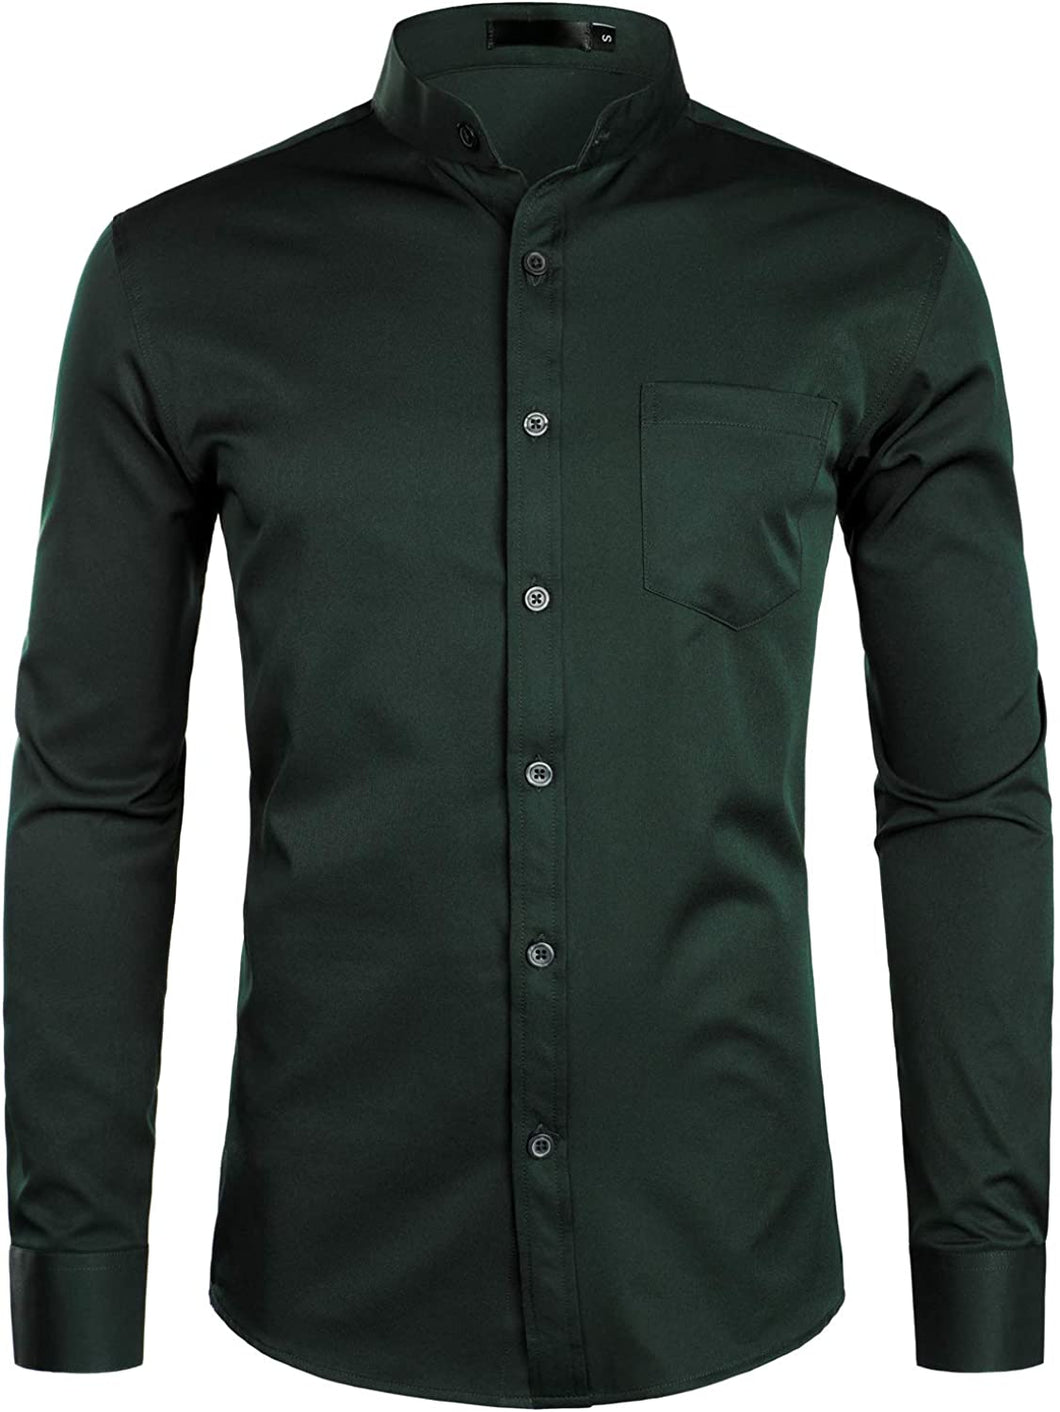 Men's Banded Collar Forest Green Long Sleeve Button Down Shirt